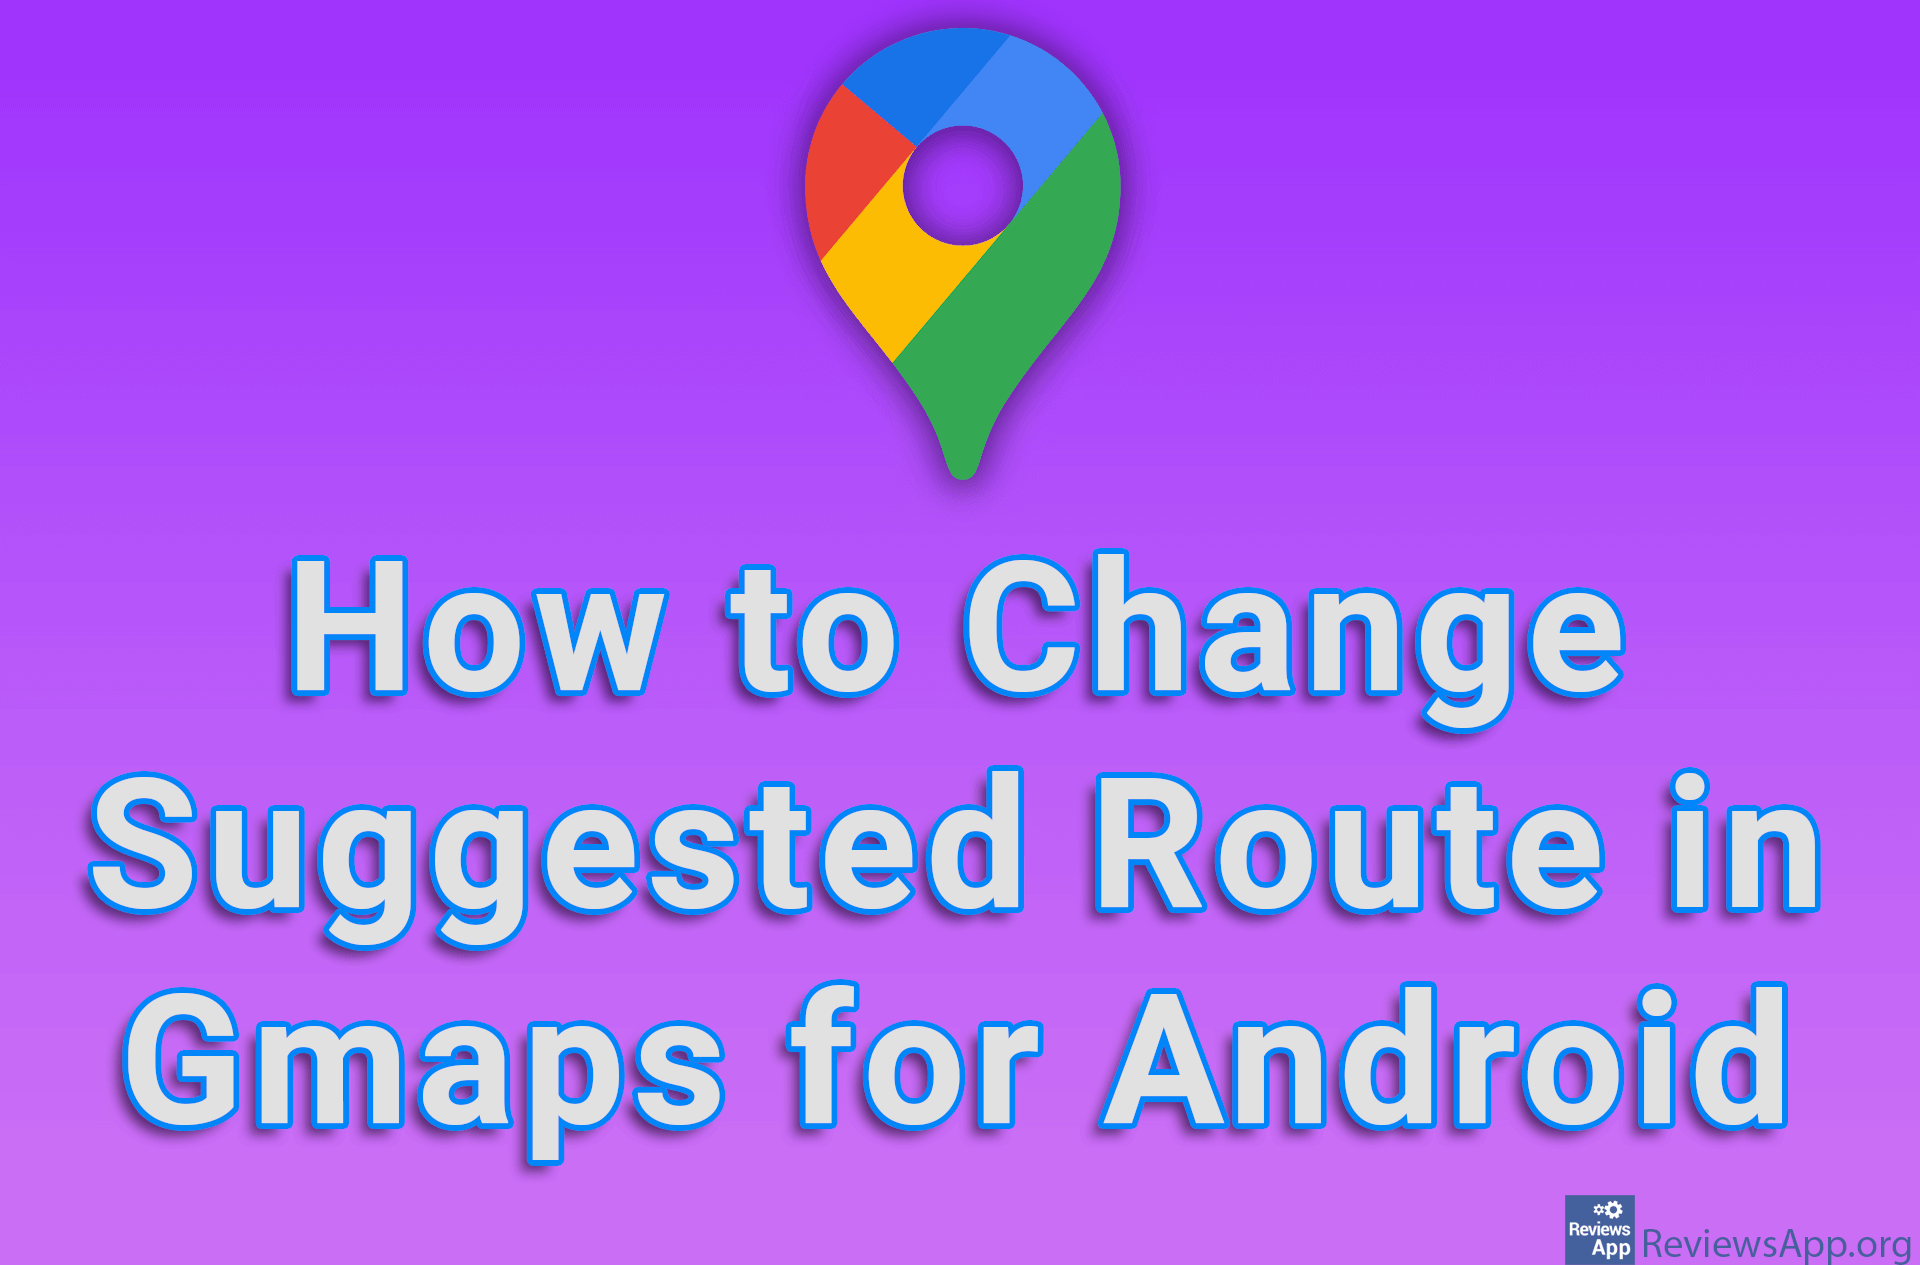 How to Change Suggested Route in Gmaps for Android